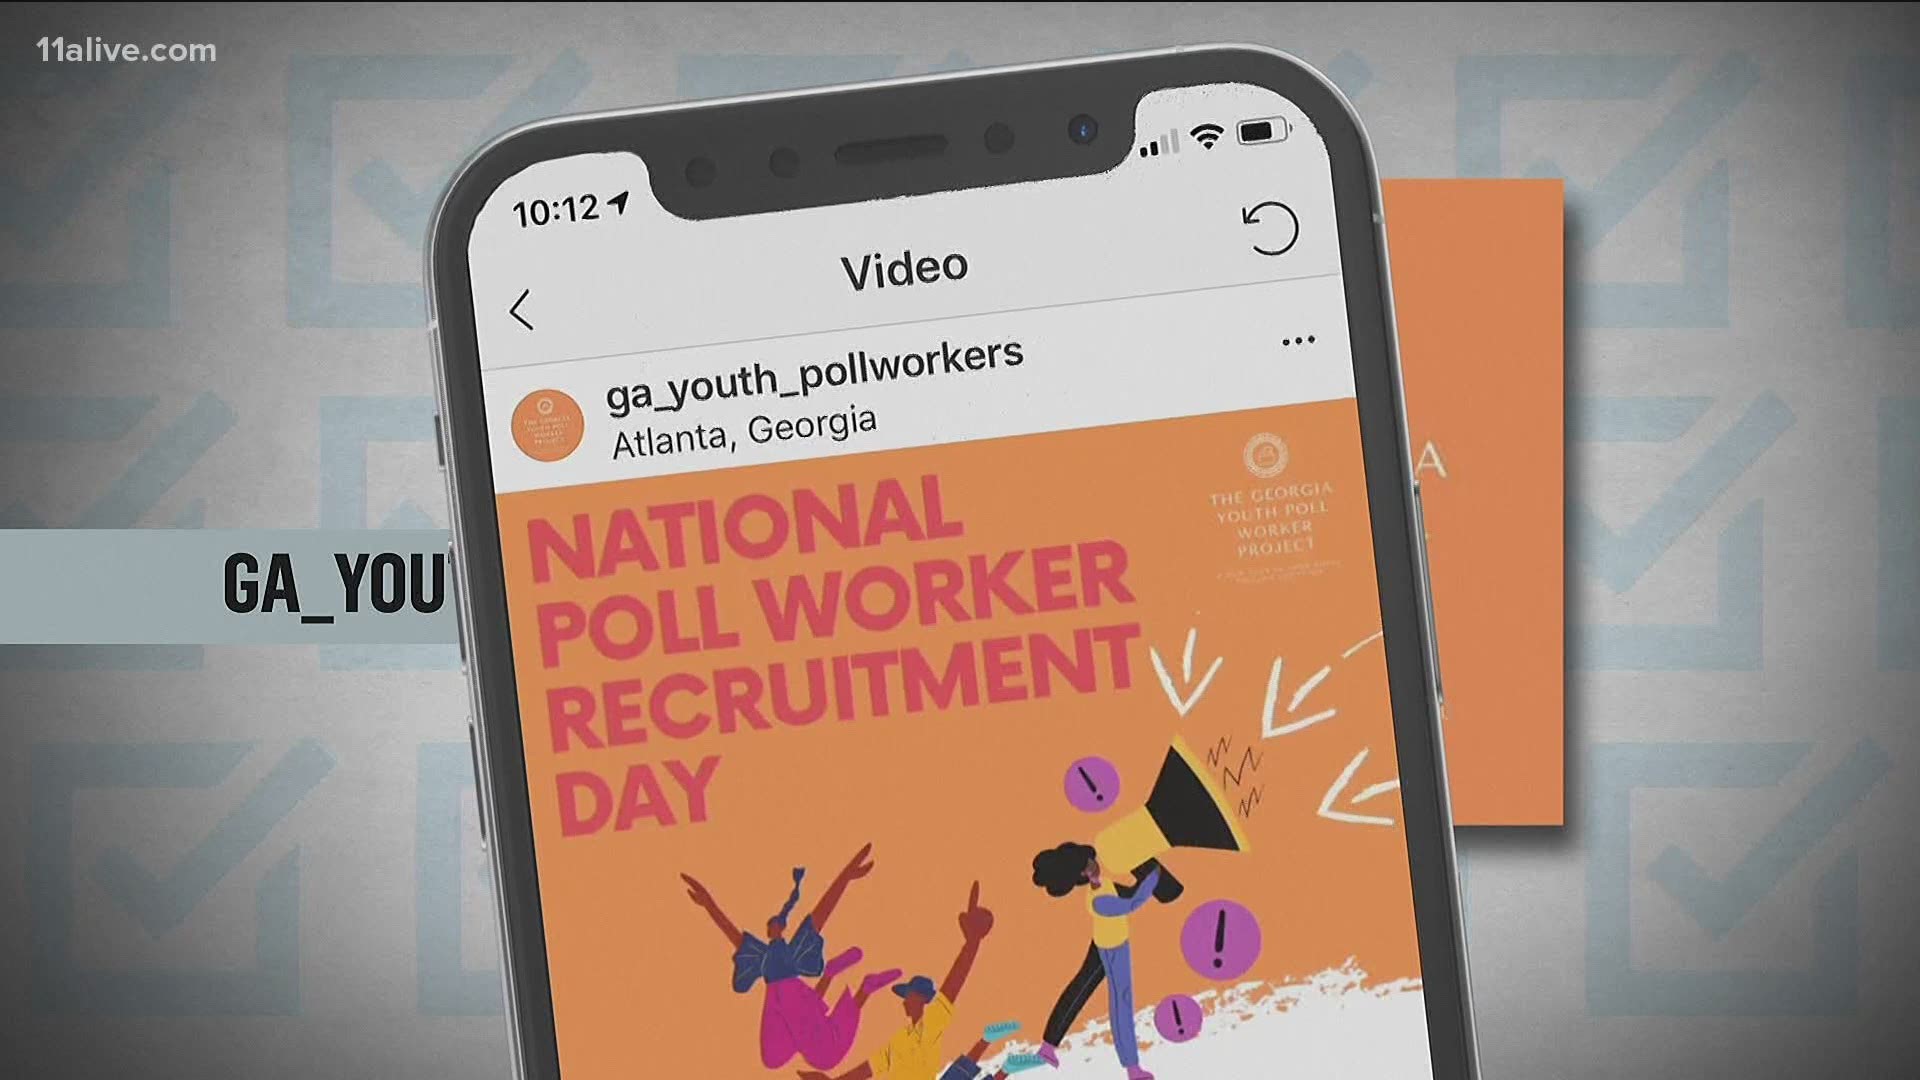 With recruiting efforts taking place on platforms where it ordinarily doesn't - such as Instagram - officials and get-out-the-vote activists are hoping young people